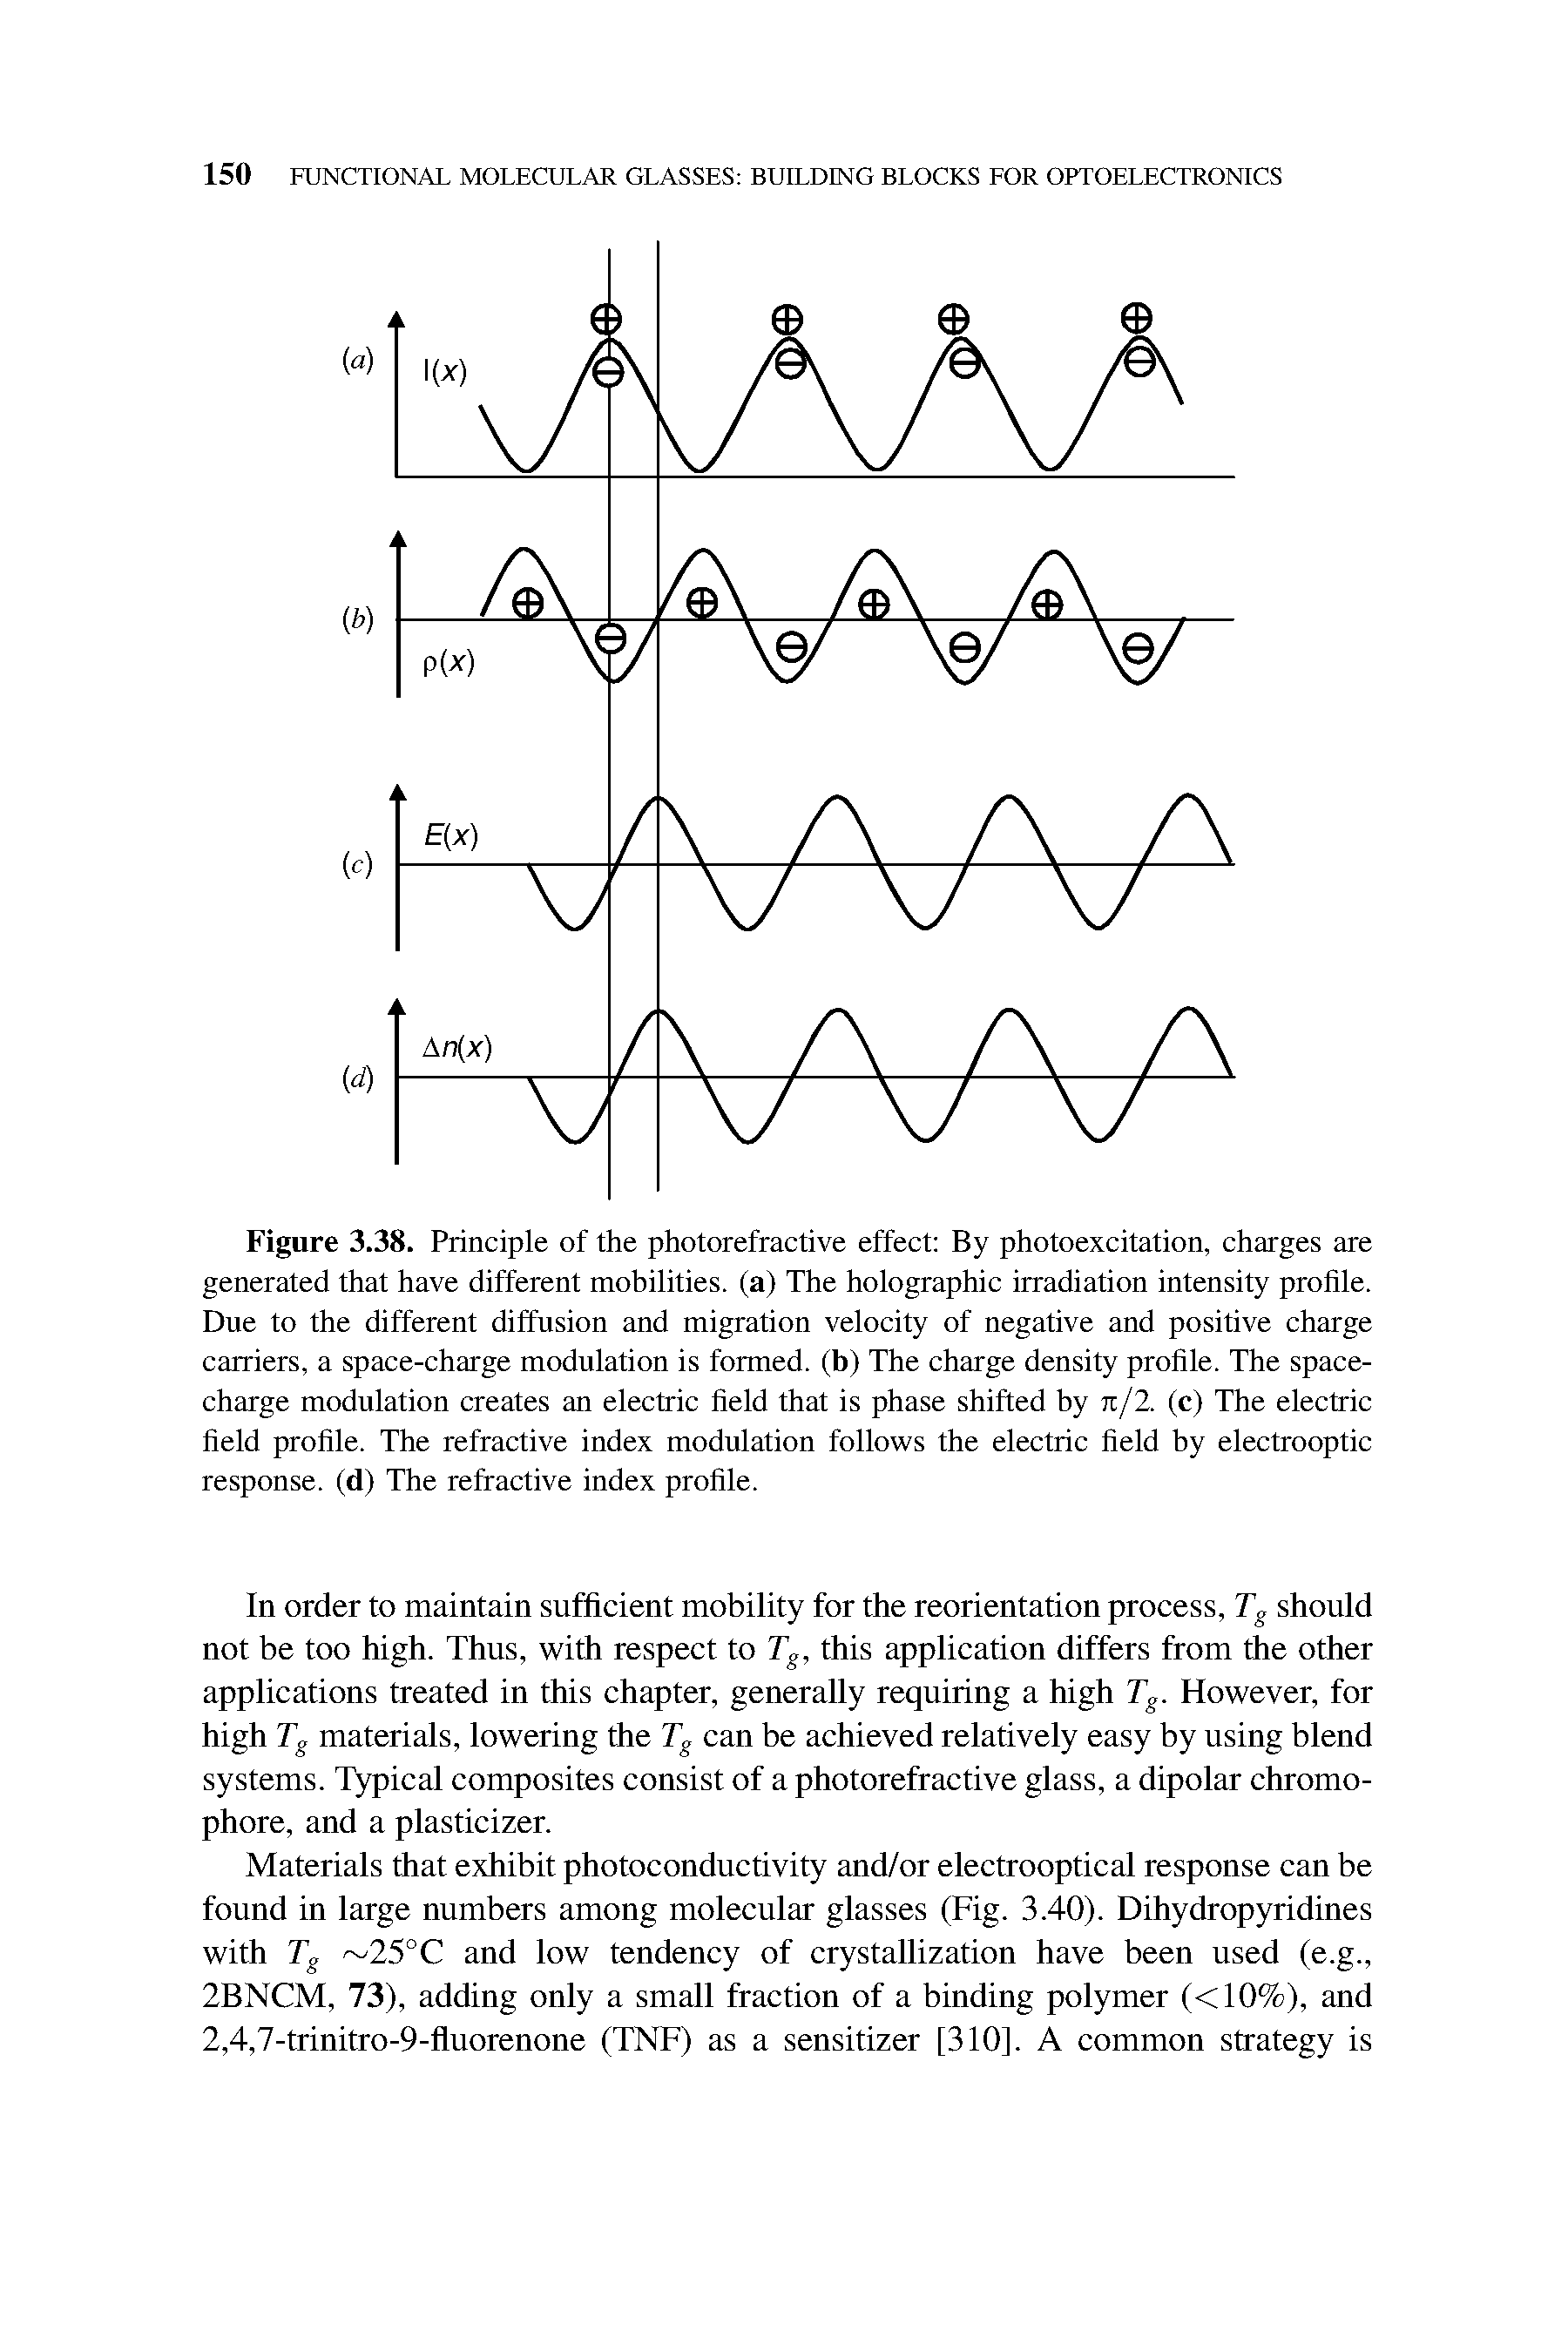 Figure 3.38. Principle of the photorefractive effect By photoexcitation, charges are generated that have different mobilities, (a) The holographic irradiation intensity profile. Due to the different diffusion and migration velocity of negative and positive charge carriers, a space-charge modulation is formed, (b) The charge density profile. The space-charge modulation creates an electric Held that is phase shifted by re/2. (c) The electric field profile. The refractive index modulation follows the electric field by electrooptic response, (d) The refractive index profile.